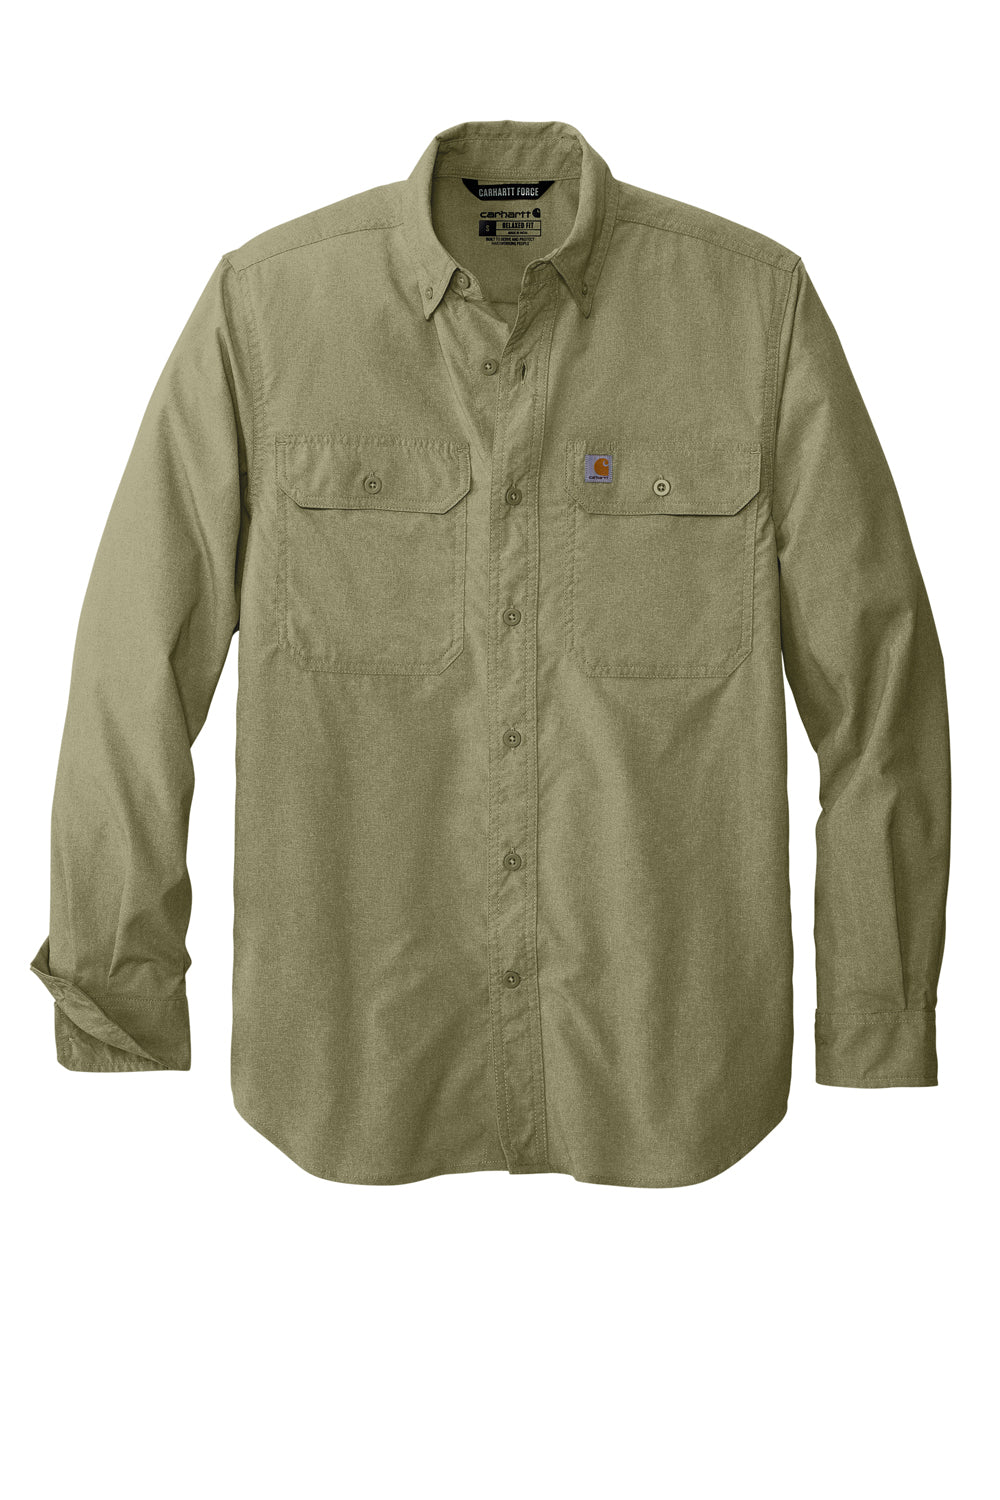 Carhartt CT105291 Mens Force Moisture Wicking Long Sleeve Button Down Shirt w/ Double Pockets Burnt Olive Green Flat Front